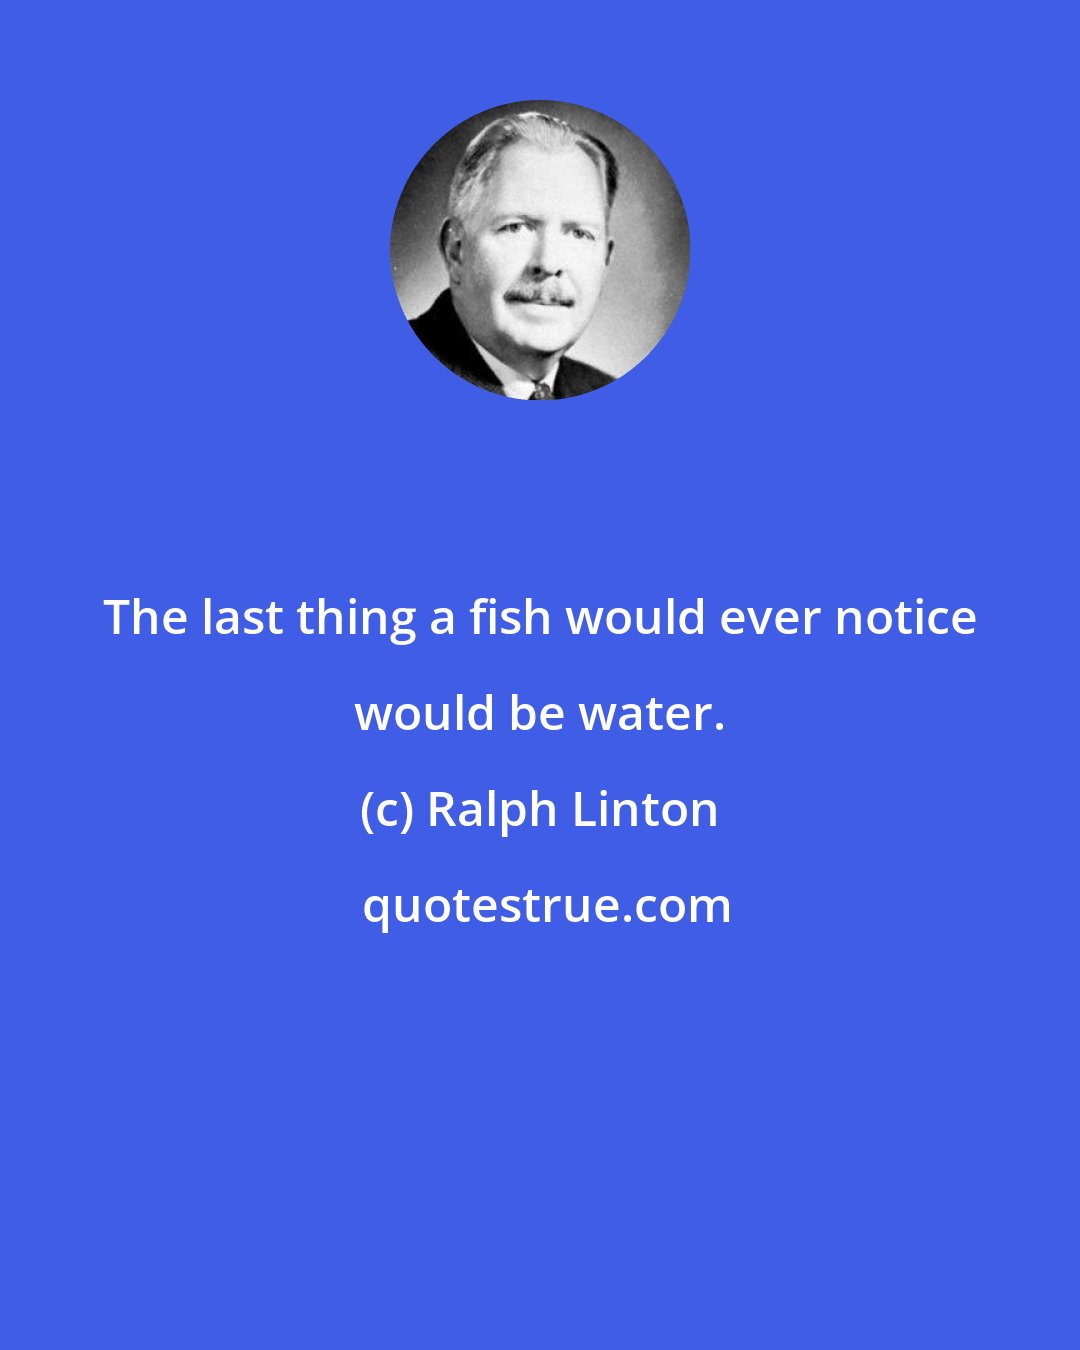 Ralph Linton: The last thing a fish would ever notice would be water.